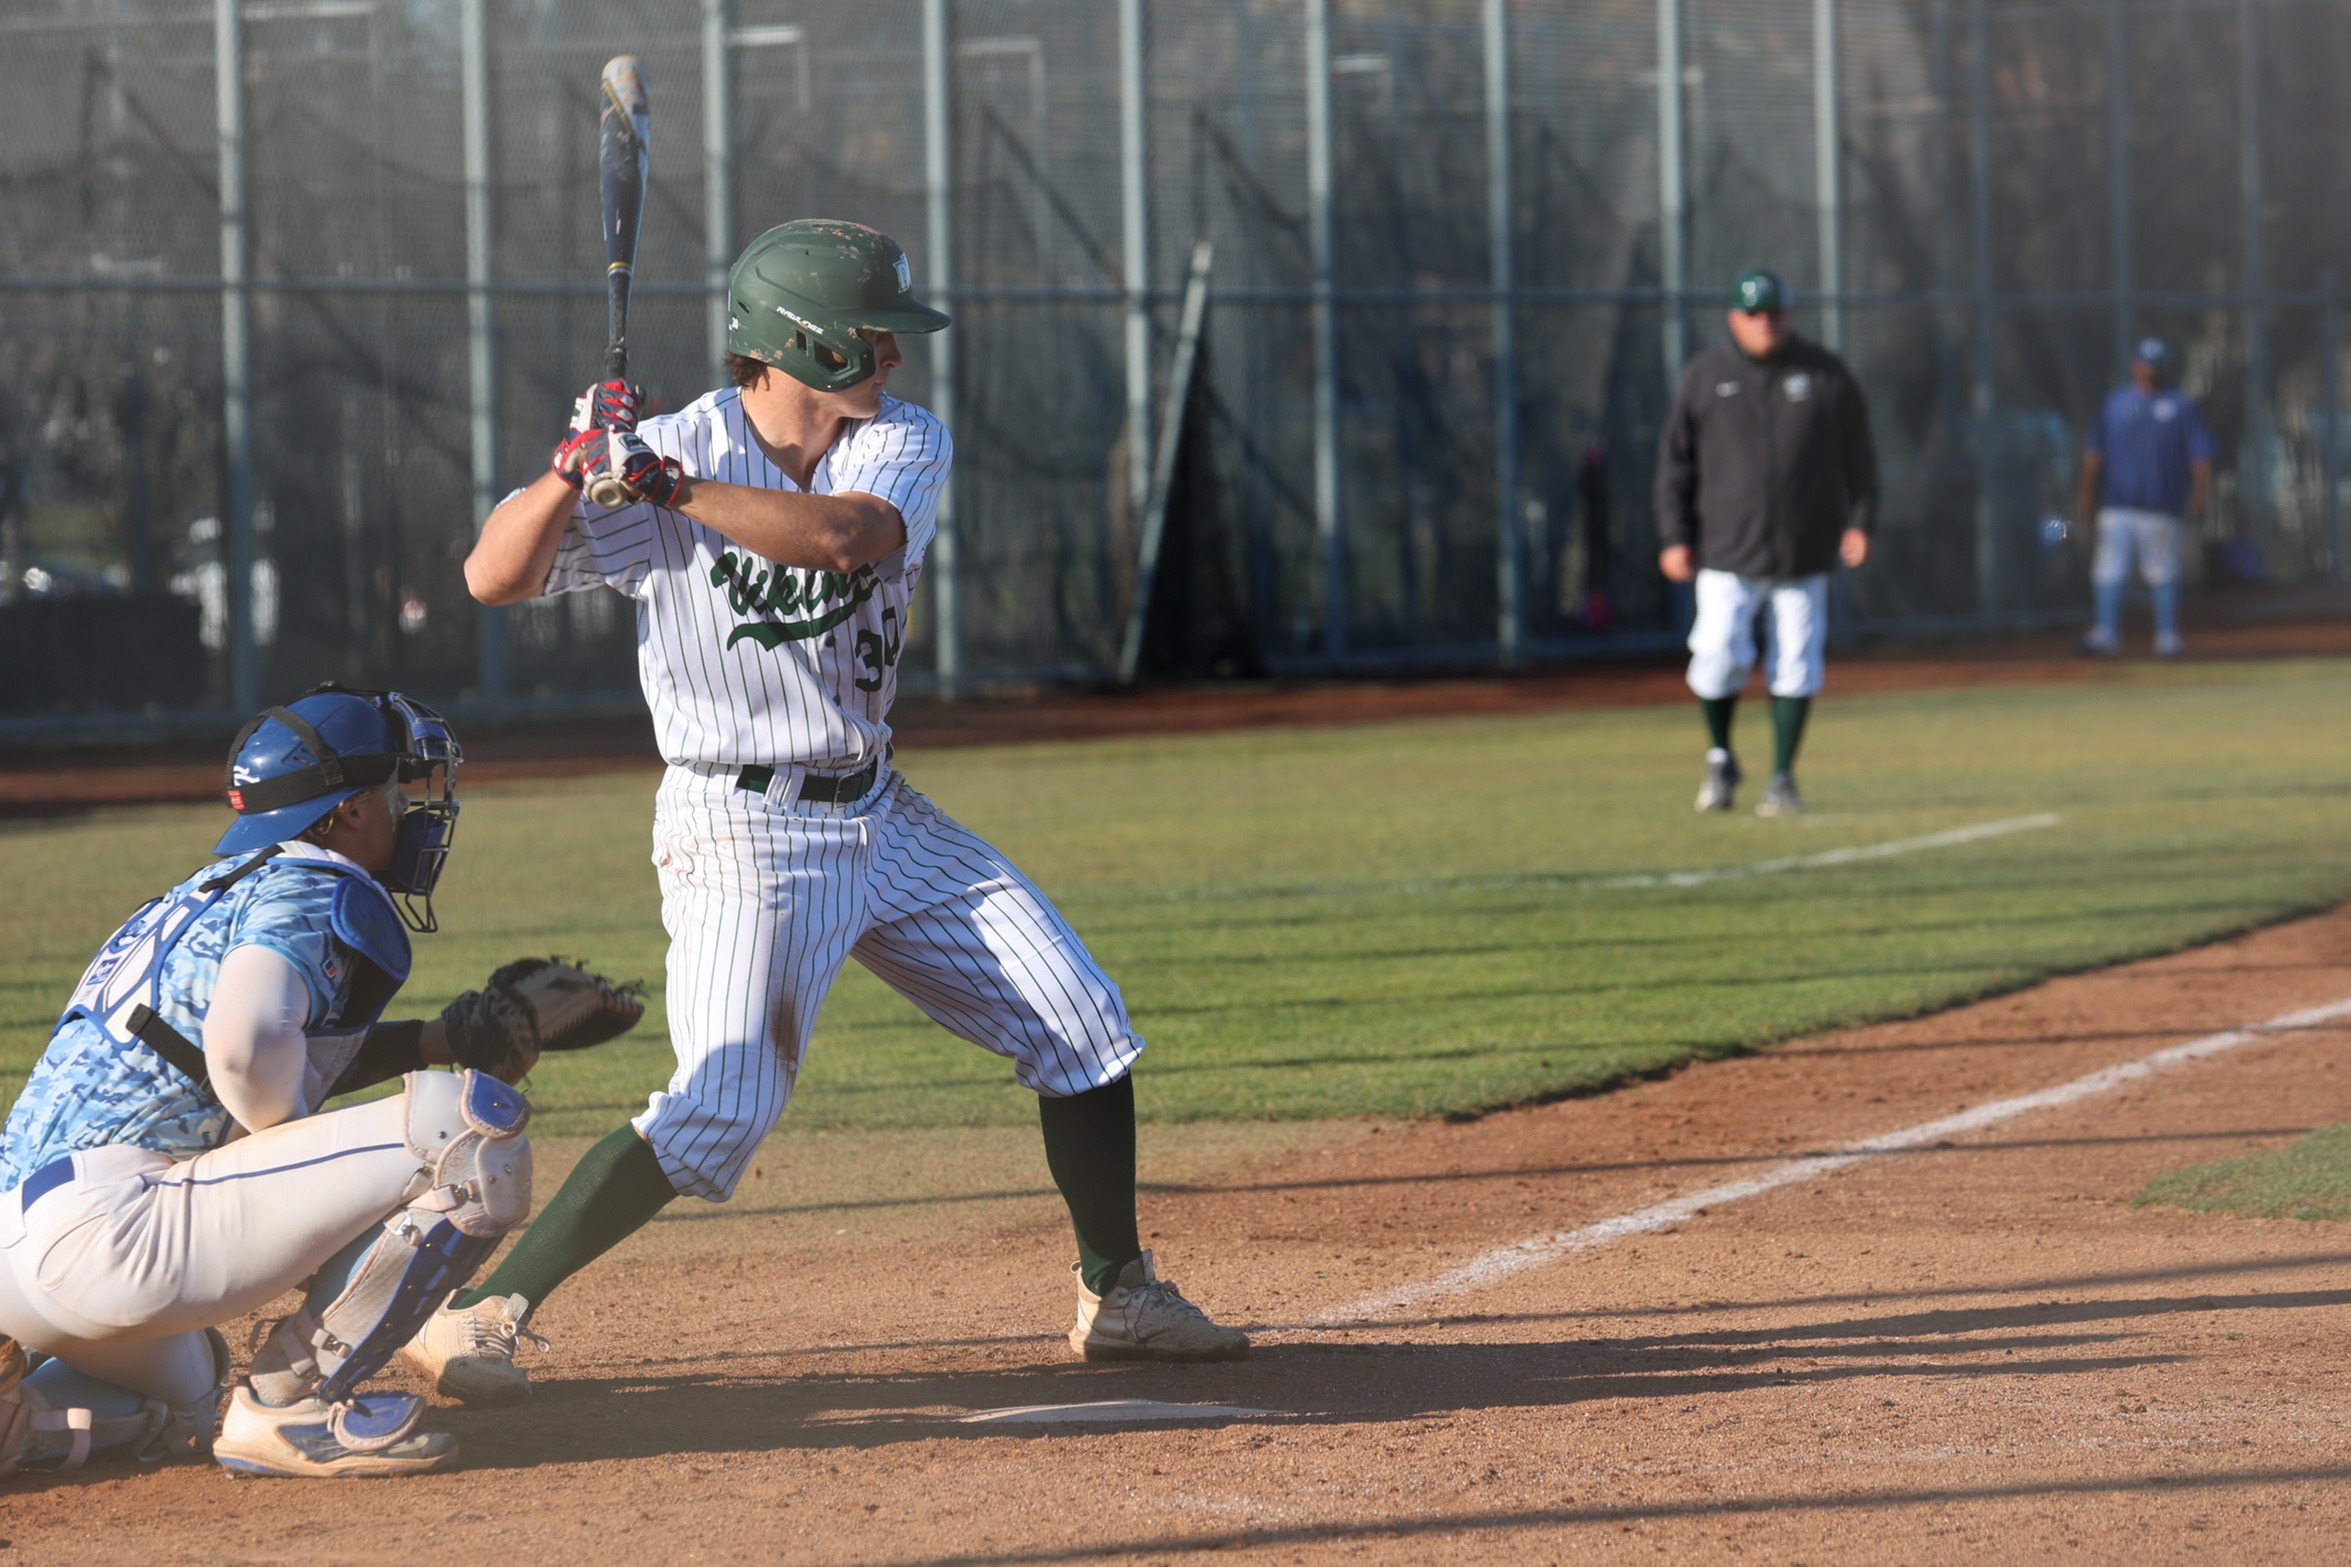 Baseball's sweep of ARC extends their win streak to 5